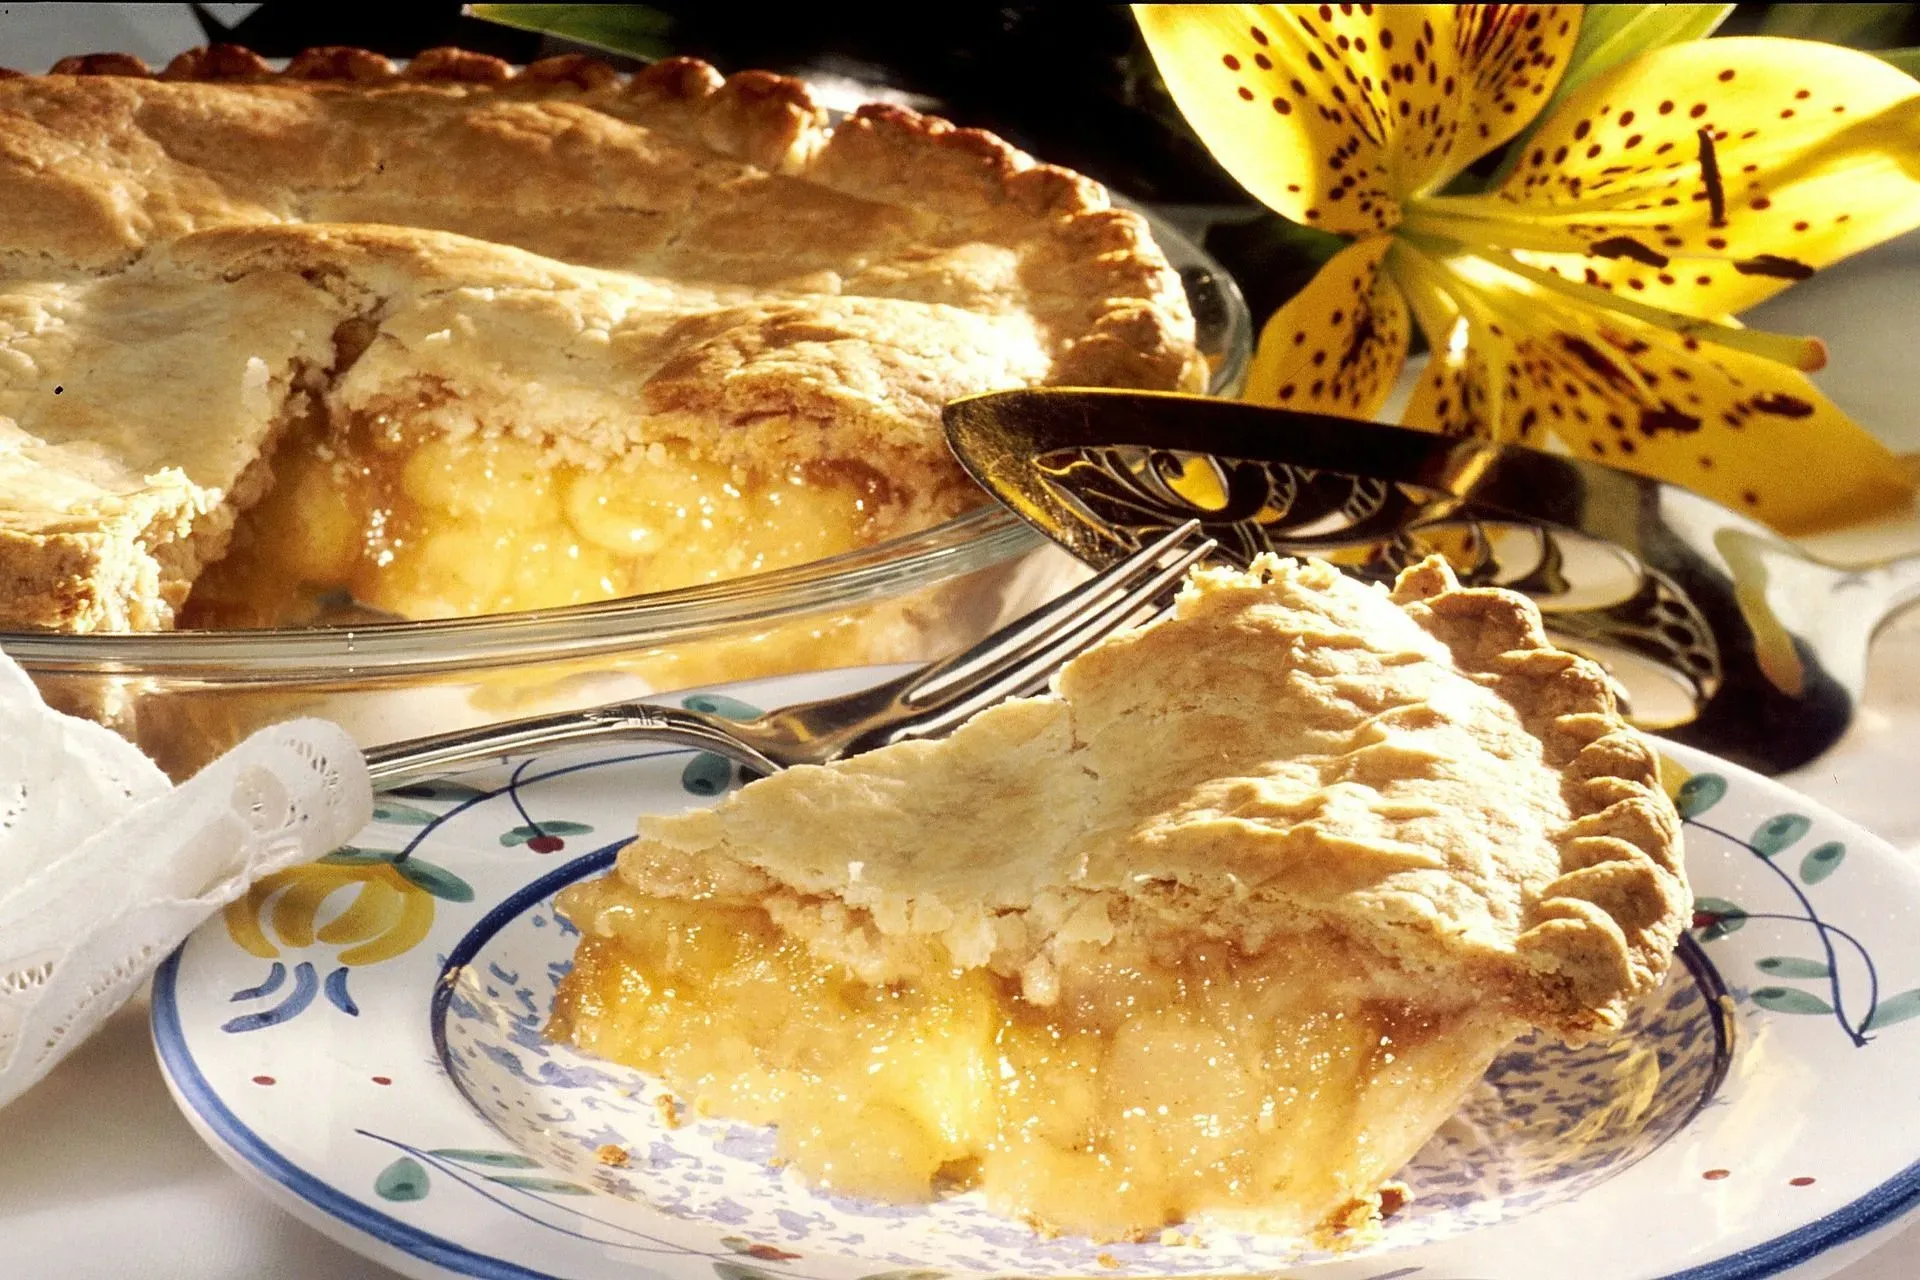 Apple pie is the perfect food to celebrate National Apple pie Day!